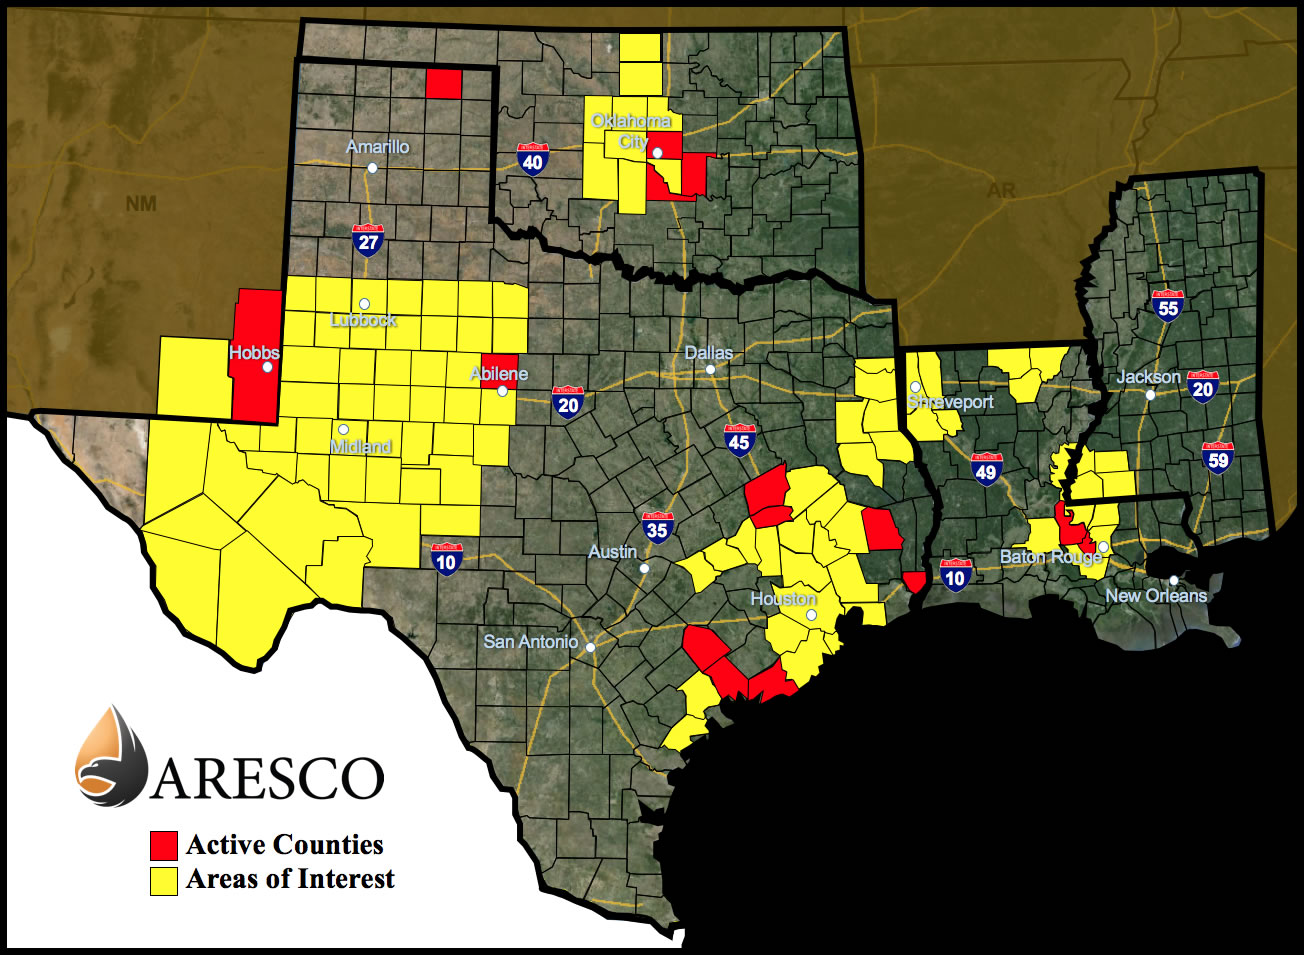 Current Crude Oil Production Areas Map in Texas, Oklahoma, Louisiana, and Mississippi